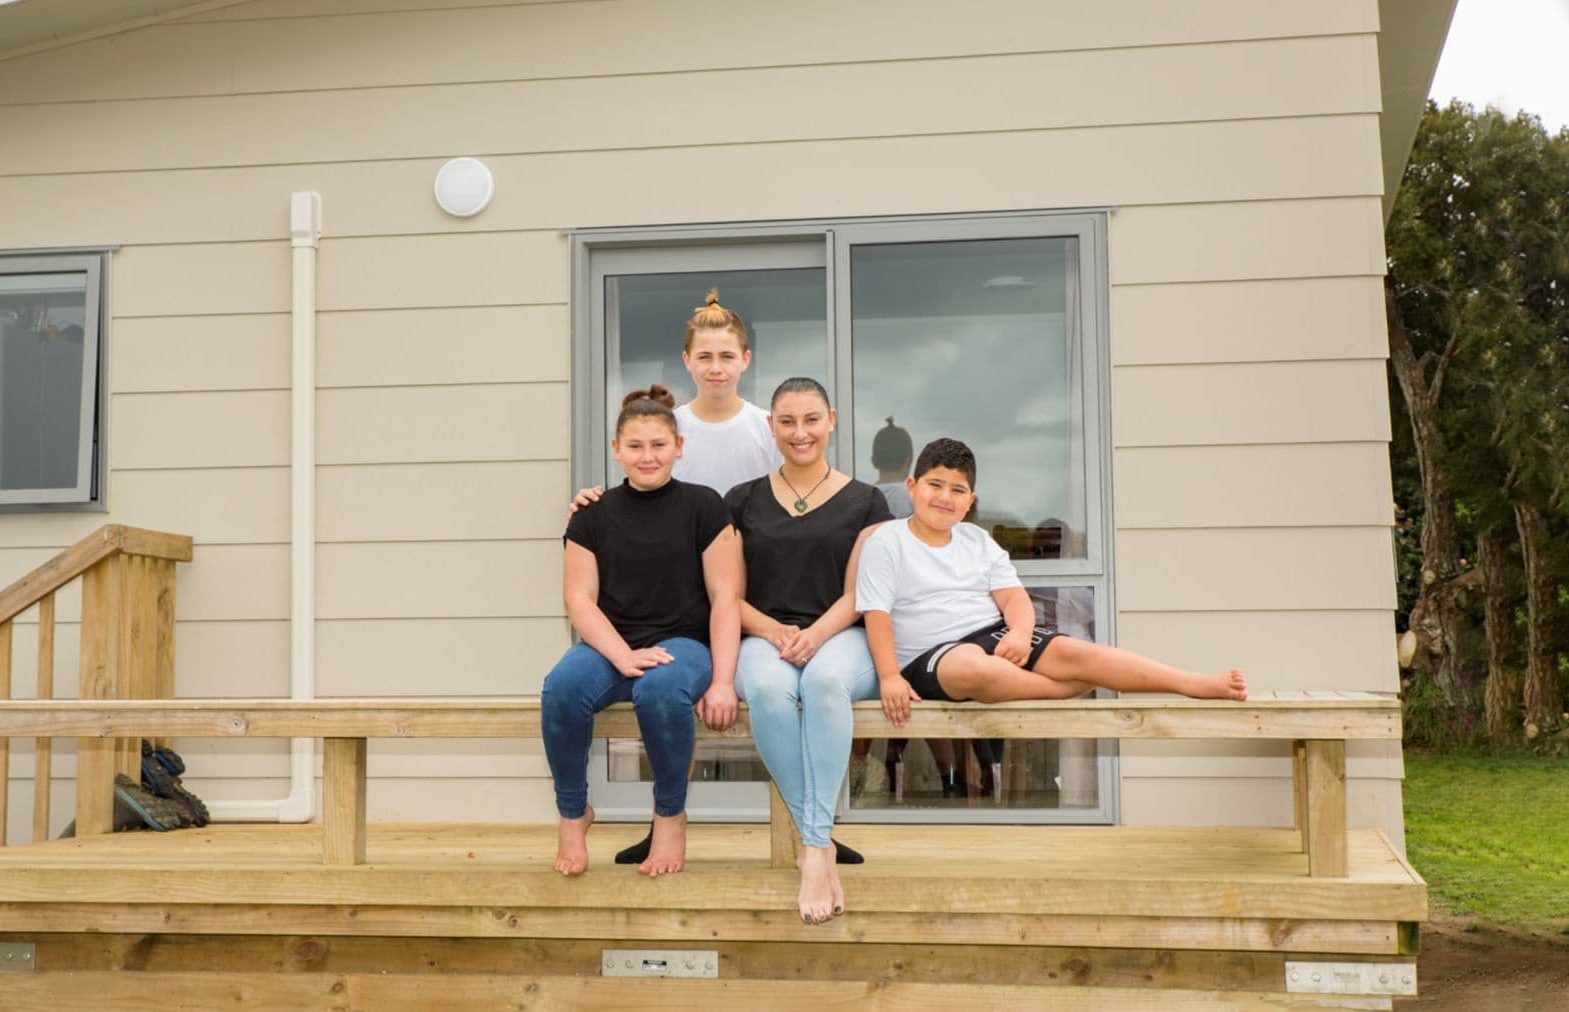 habitat family home ownership auckland